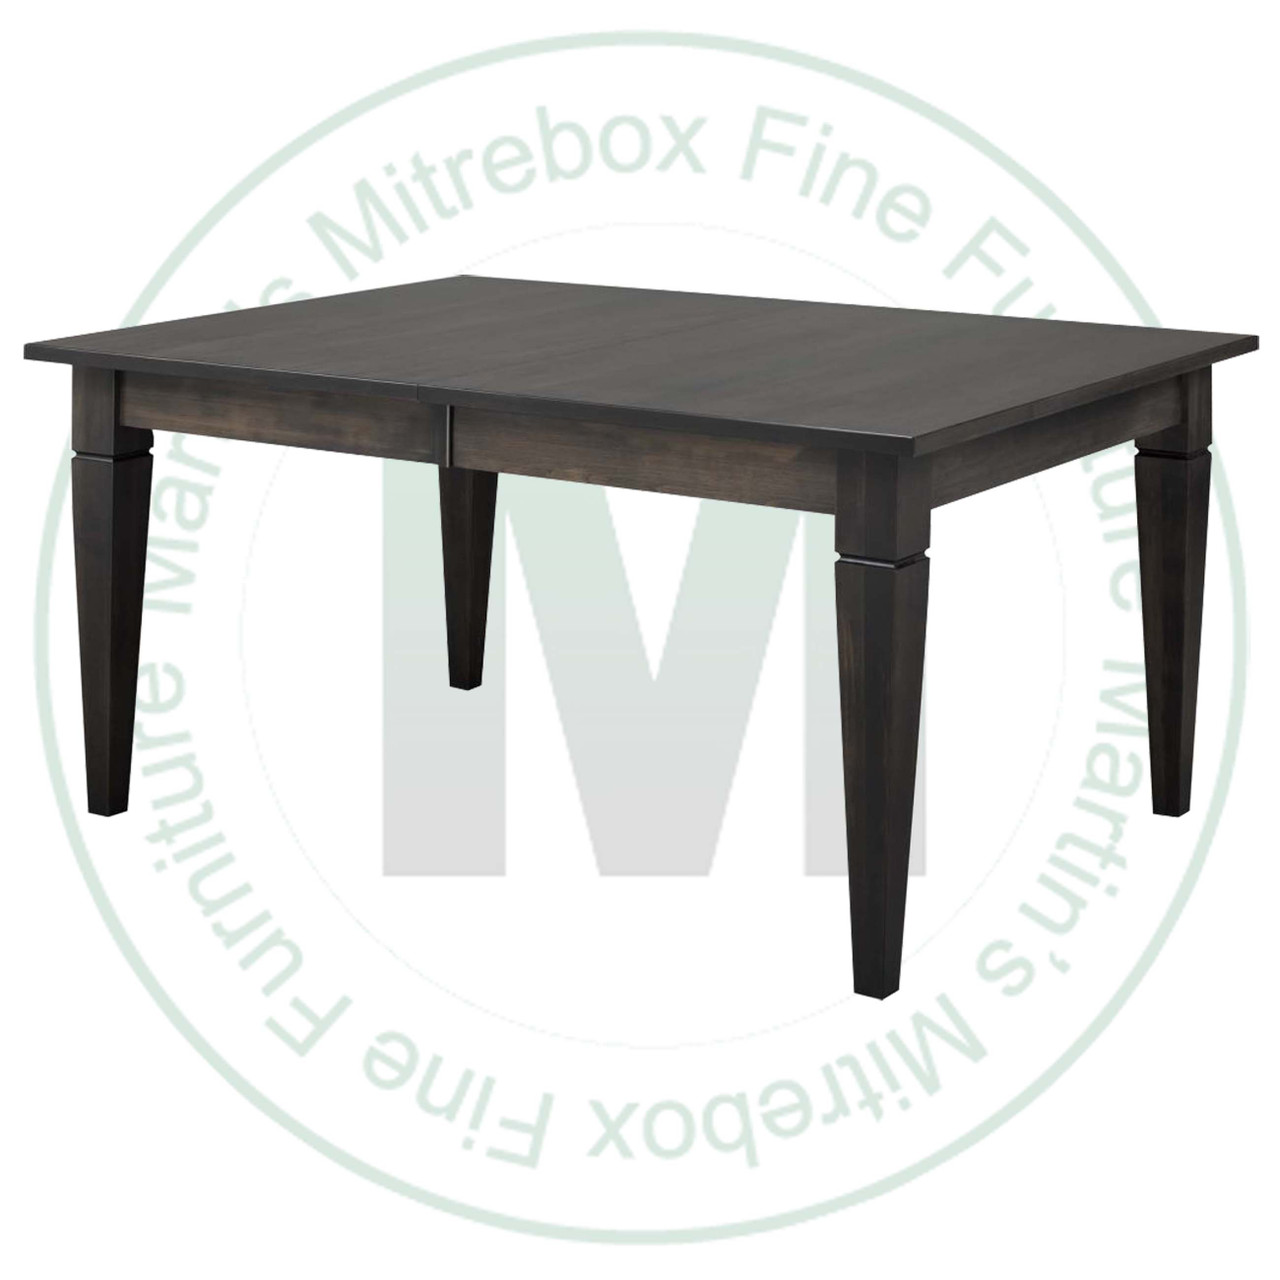 Maple Reesor Solid Top Harvest Table 48''D x 72''W x 30''H Table Has 1.25'' Thick Top And 2 - 16'' Extensions